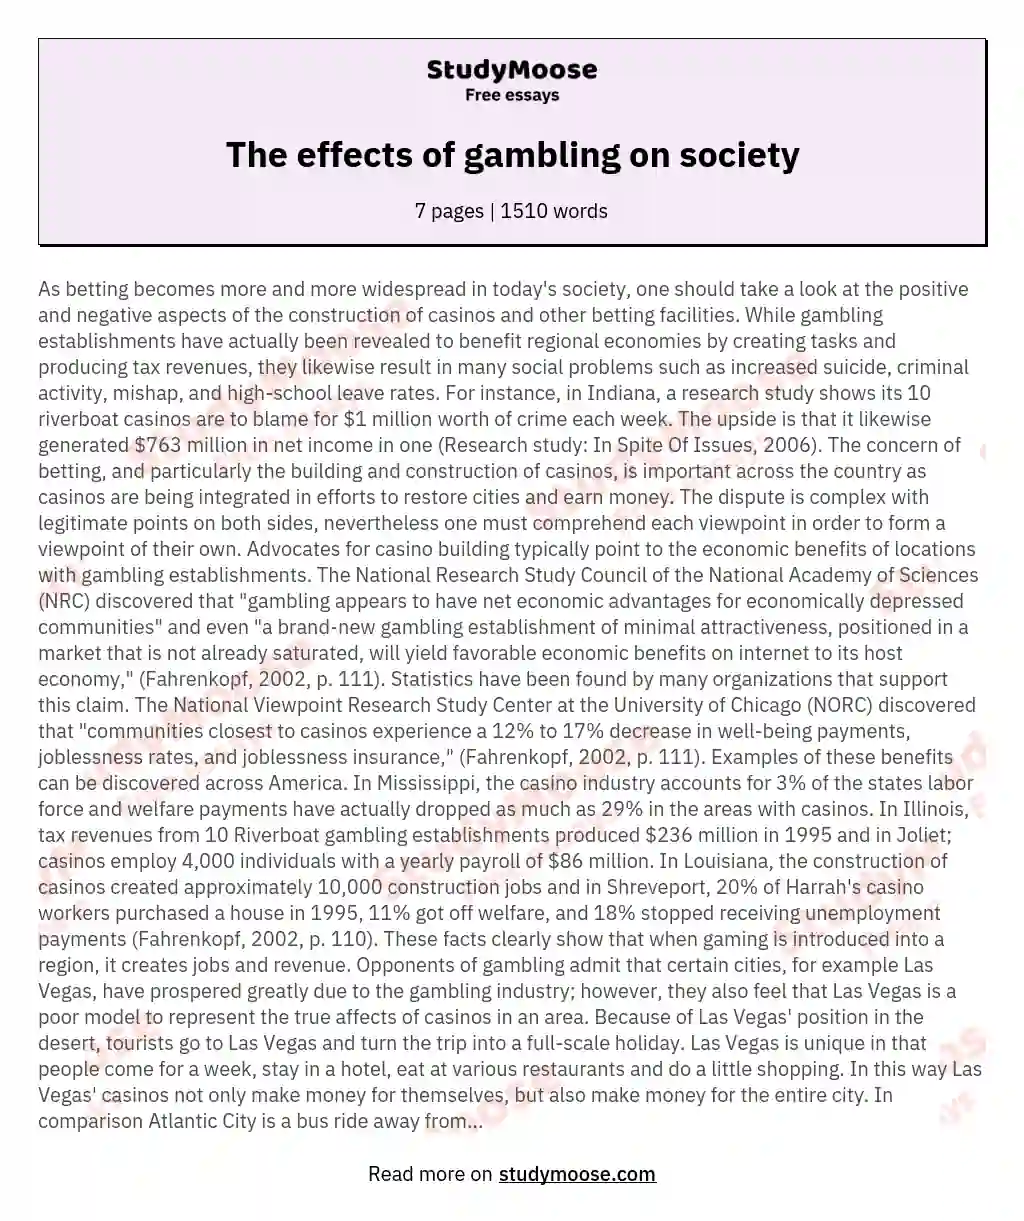 The effects of gambling on society essay